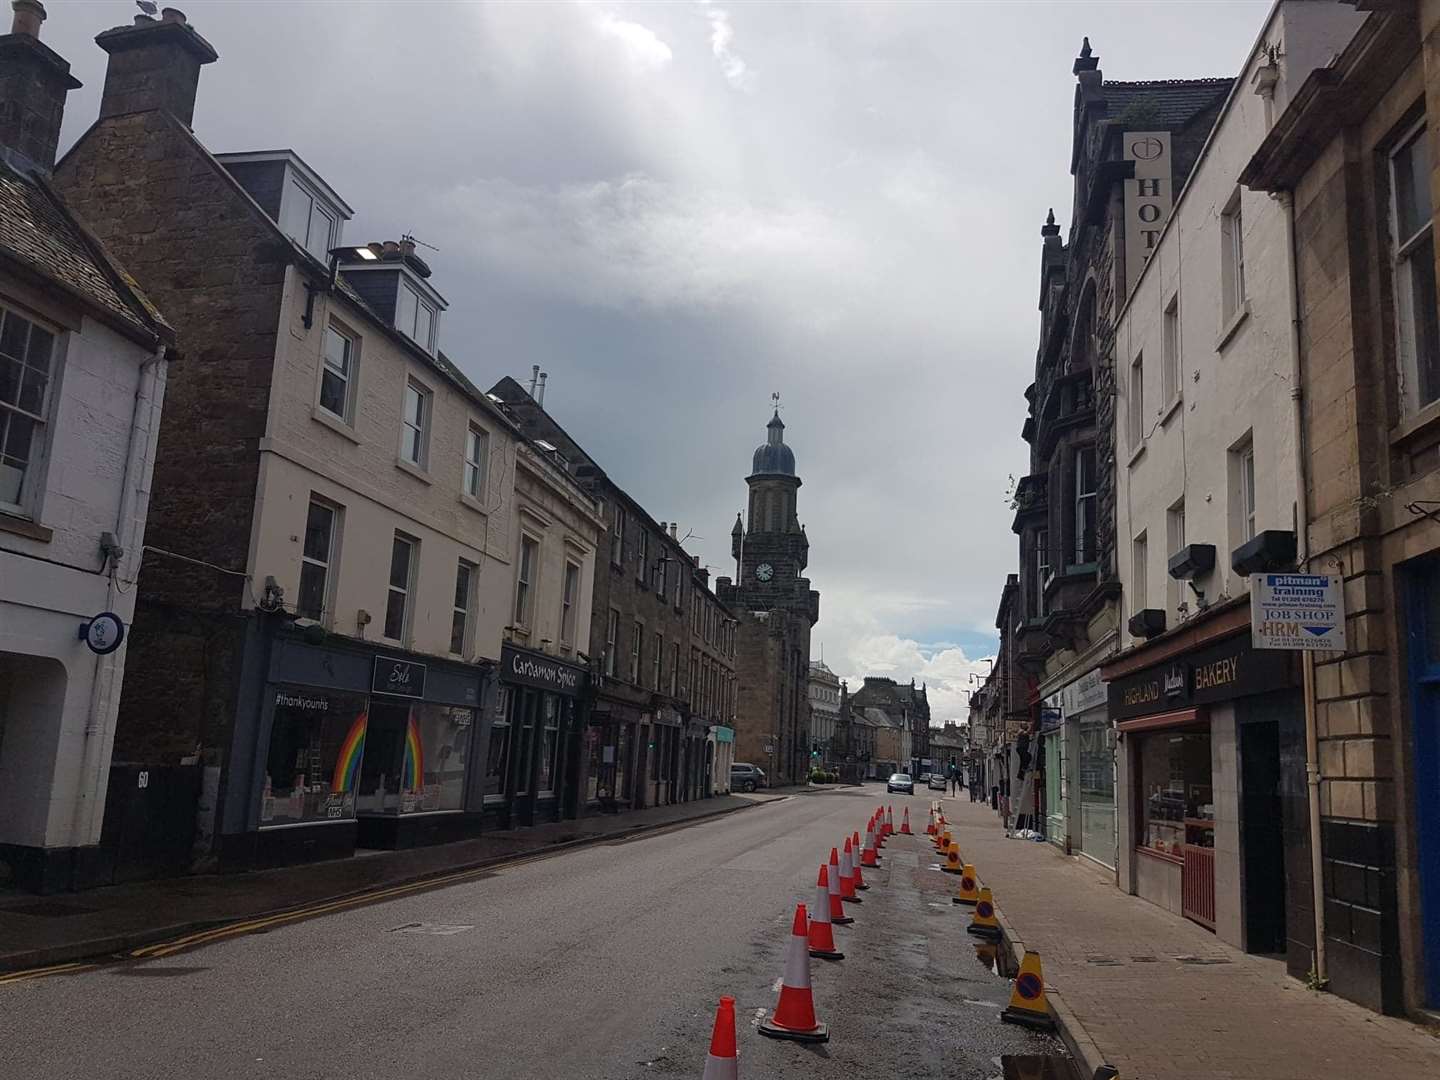 The cones will be removed for normal High Street parking to resume.